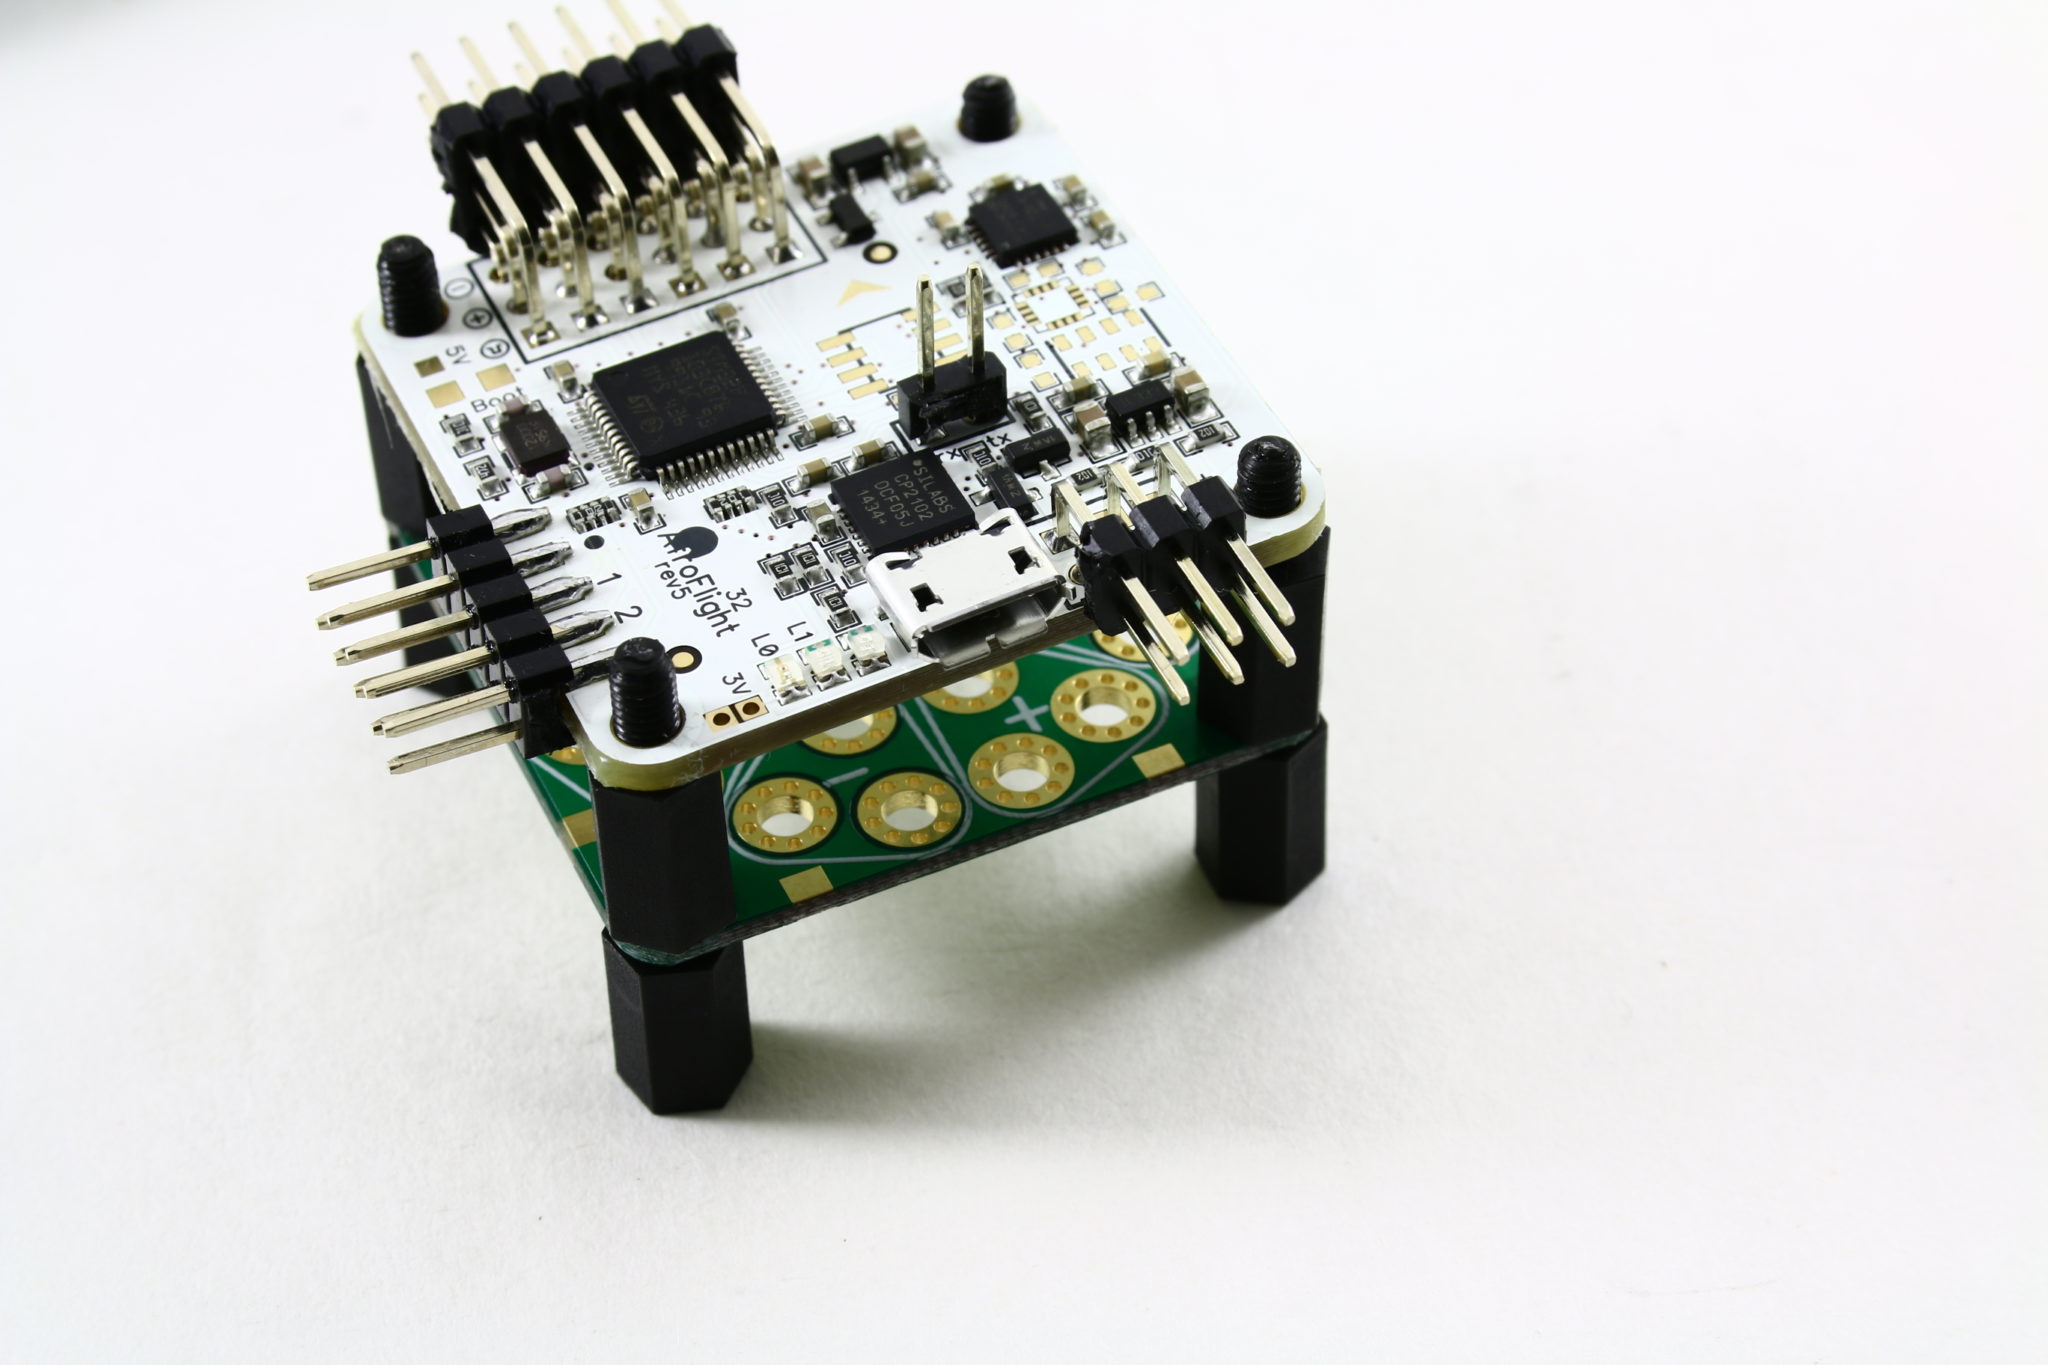 3 Oz power distribution board for Naze32 or CC3D shown with Naze32 (not included) side view